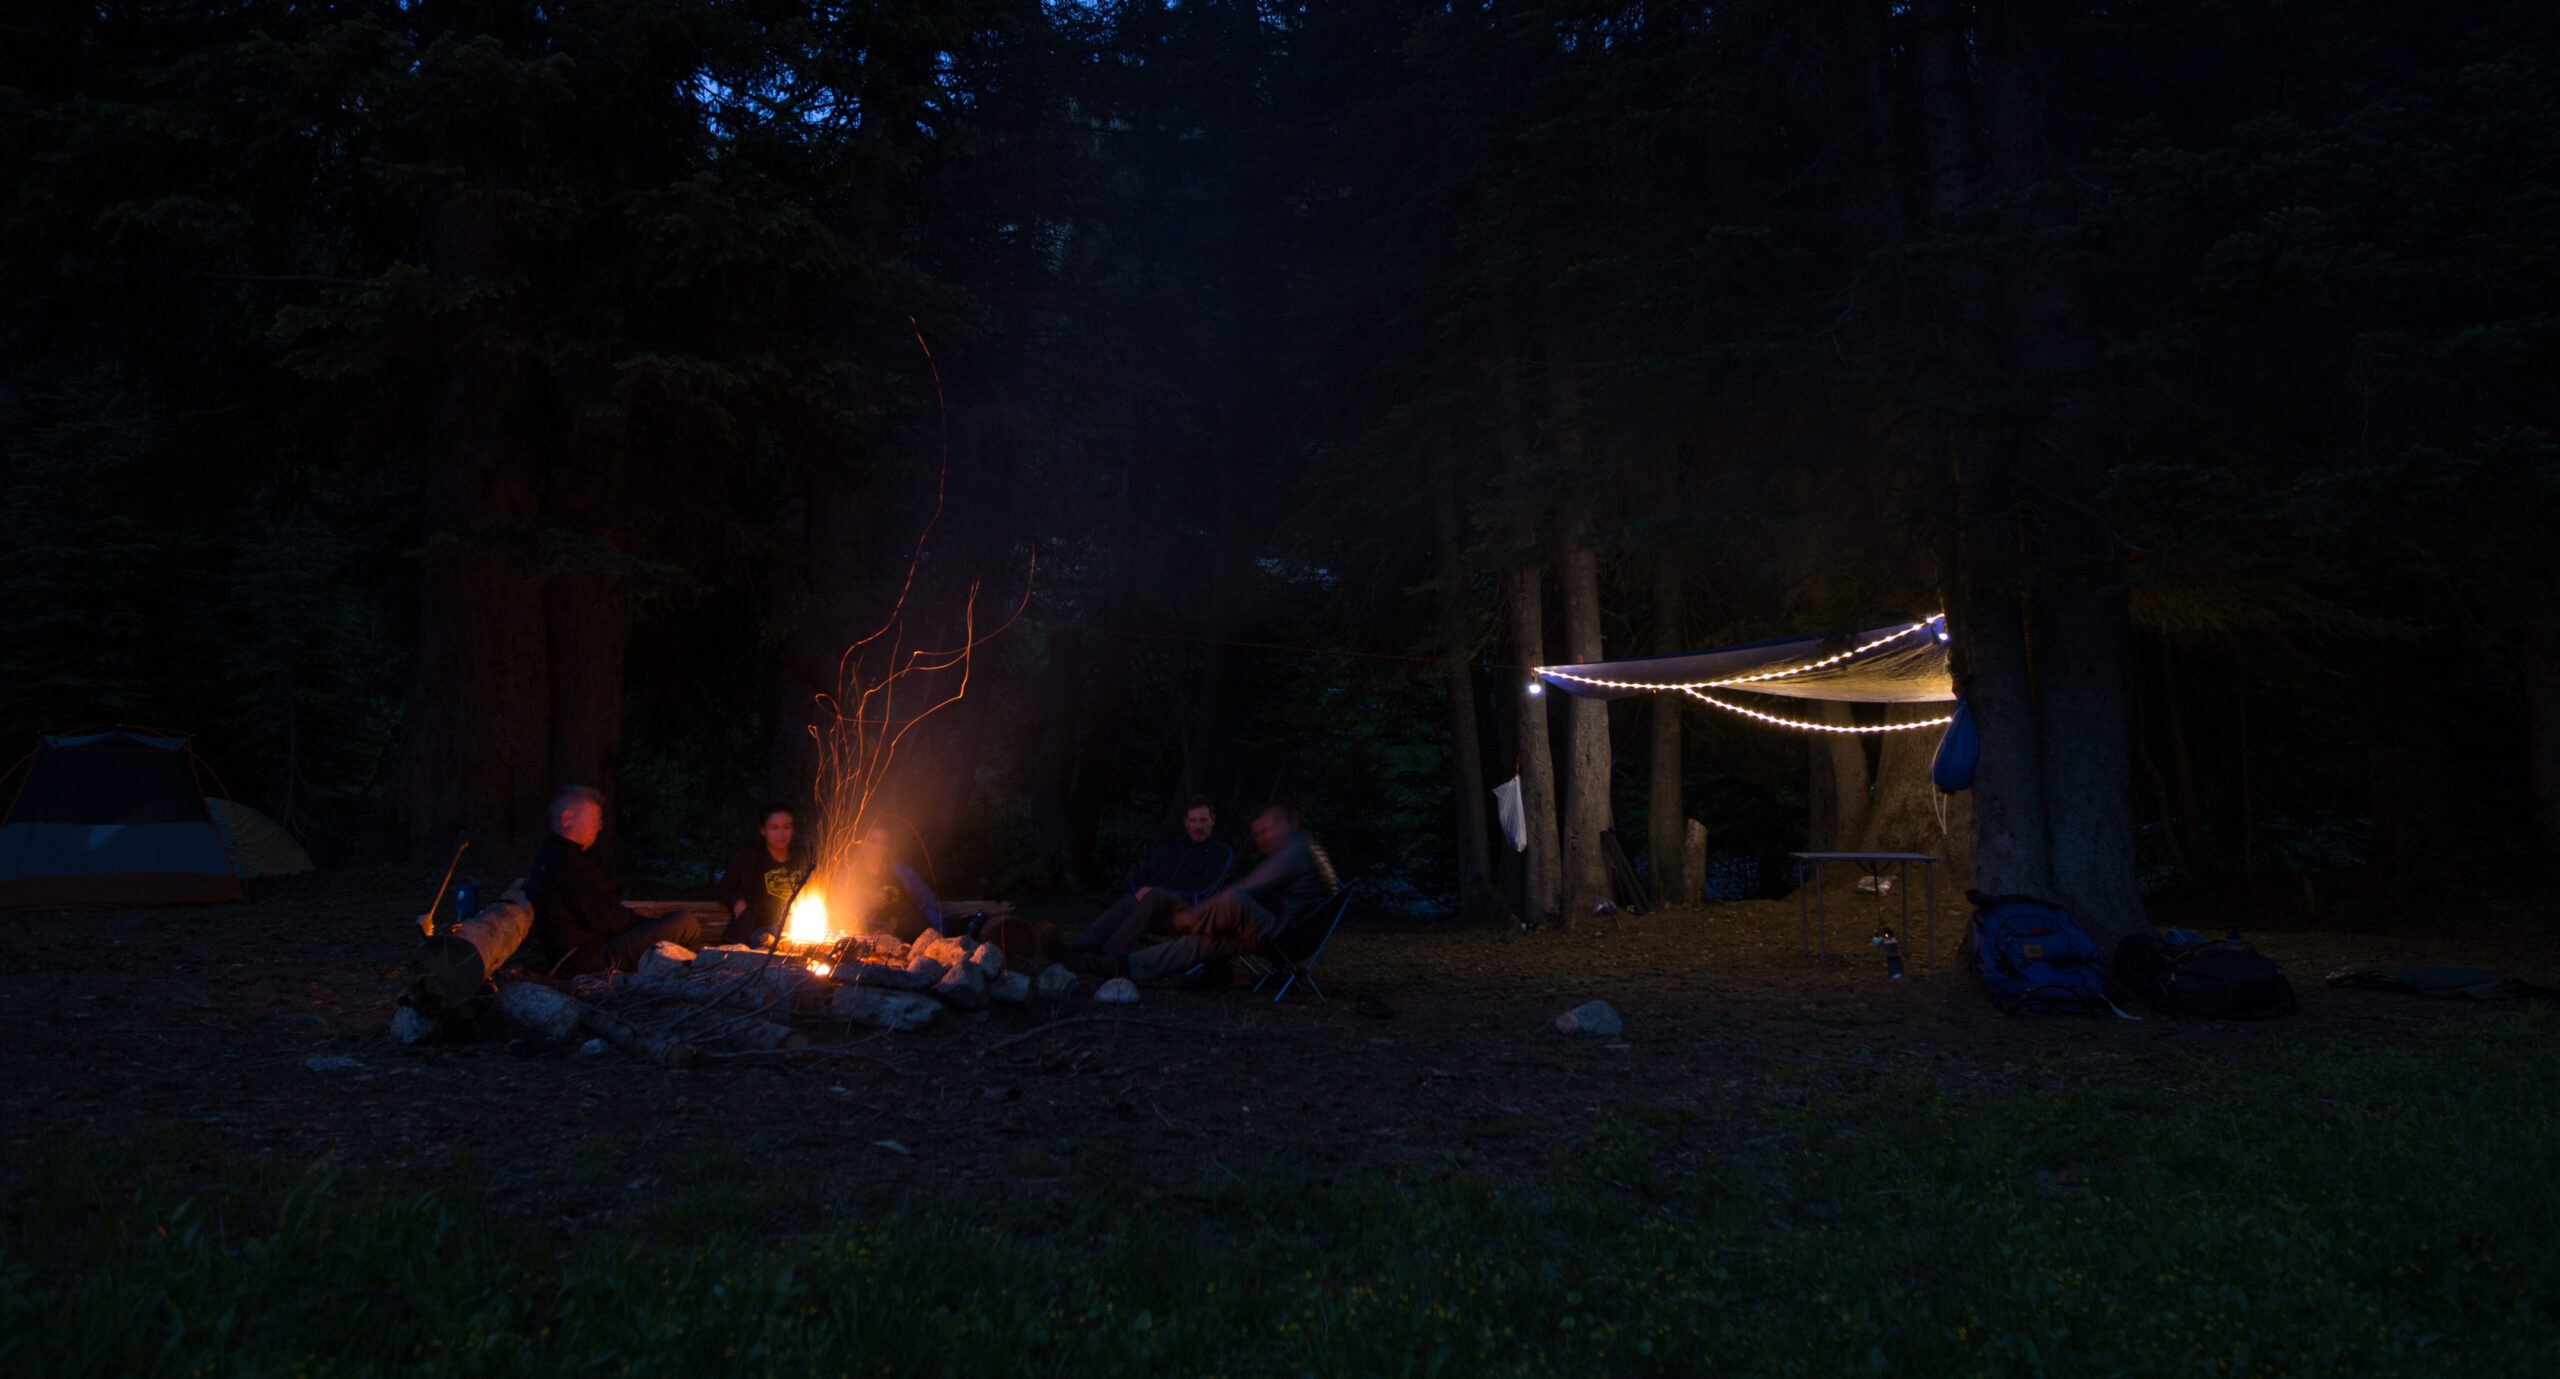 people sit by a campfire next to an illuminated canopy